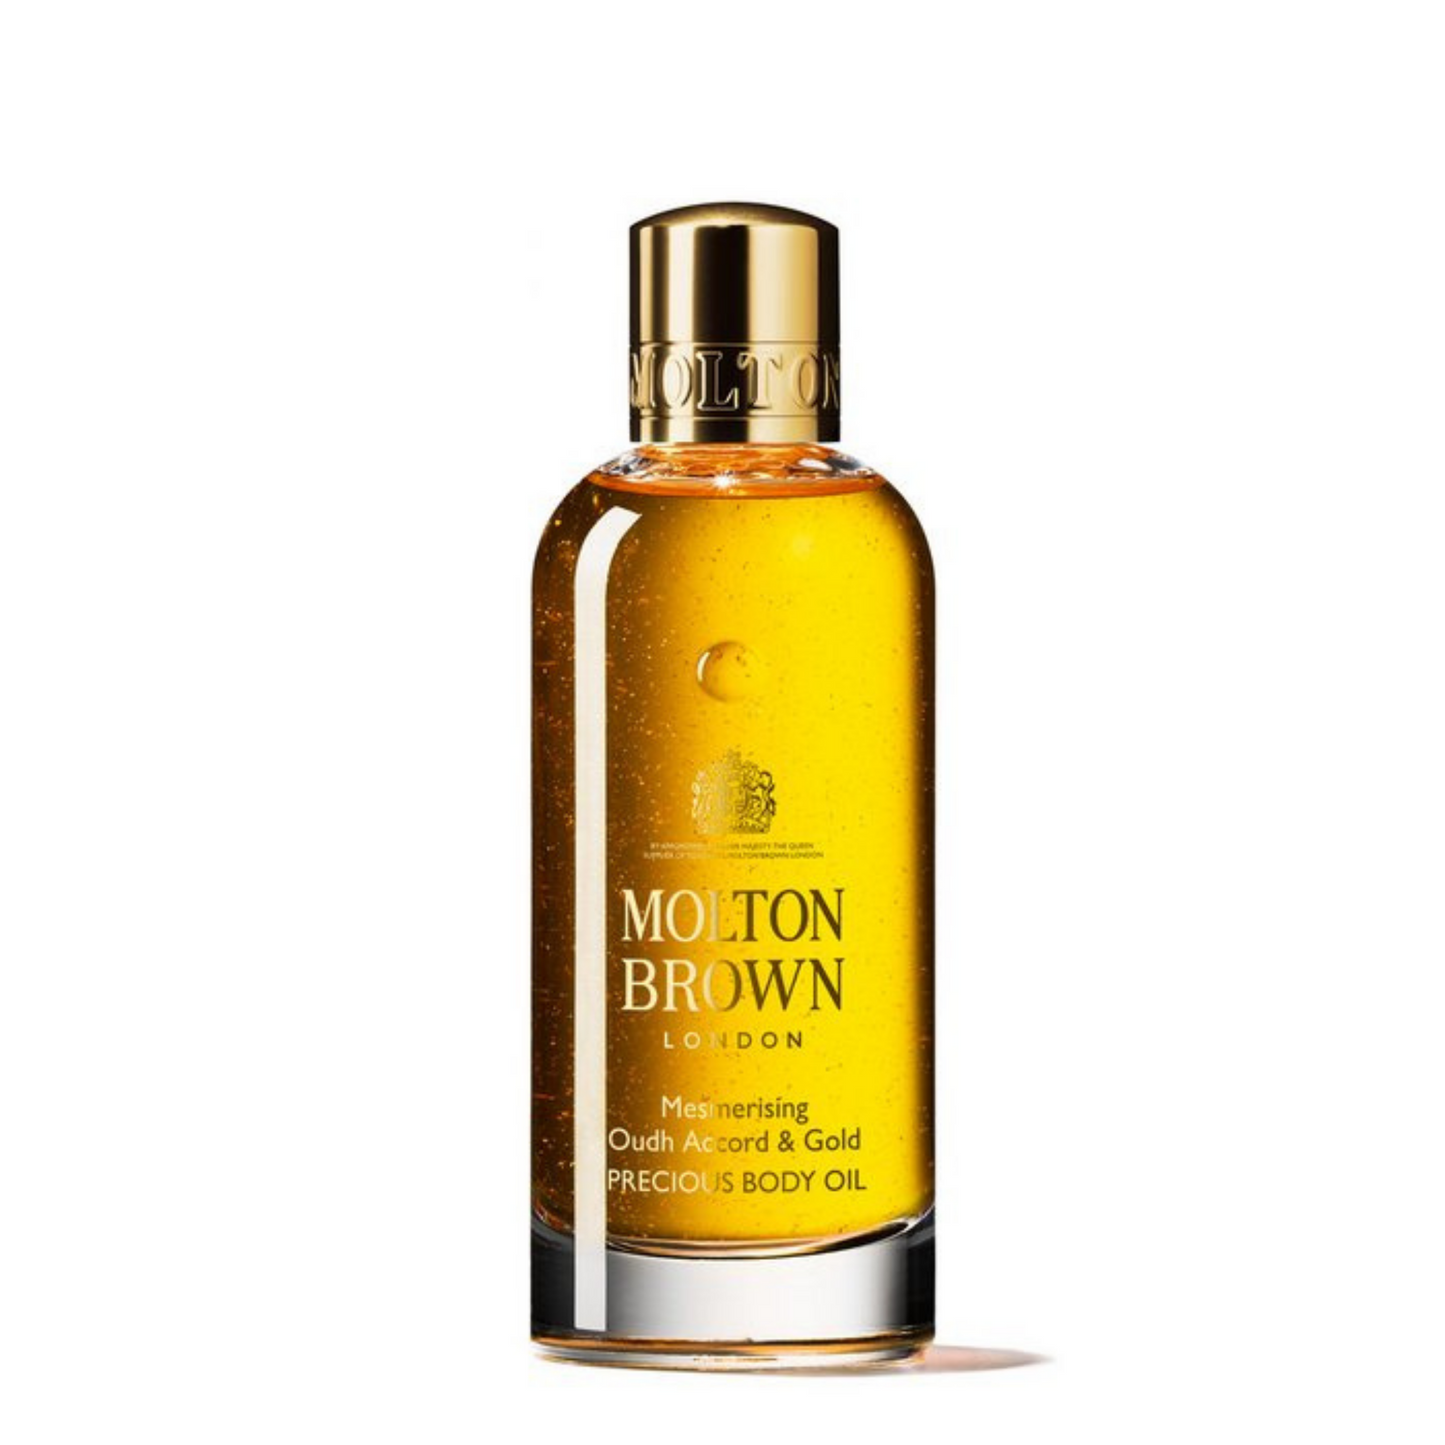 Primary Image of Mesmerising Oudh Accord & Gold Bathing Oil